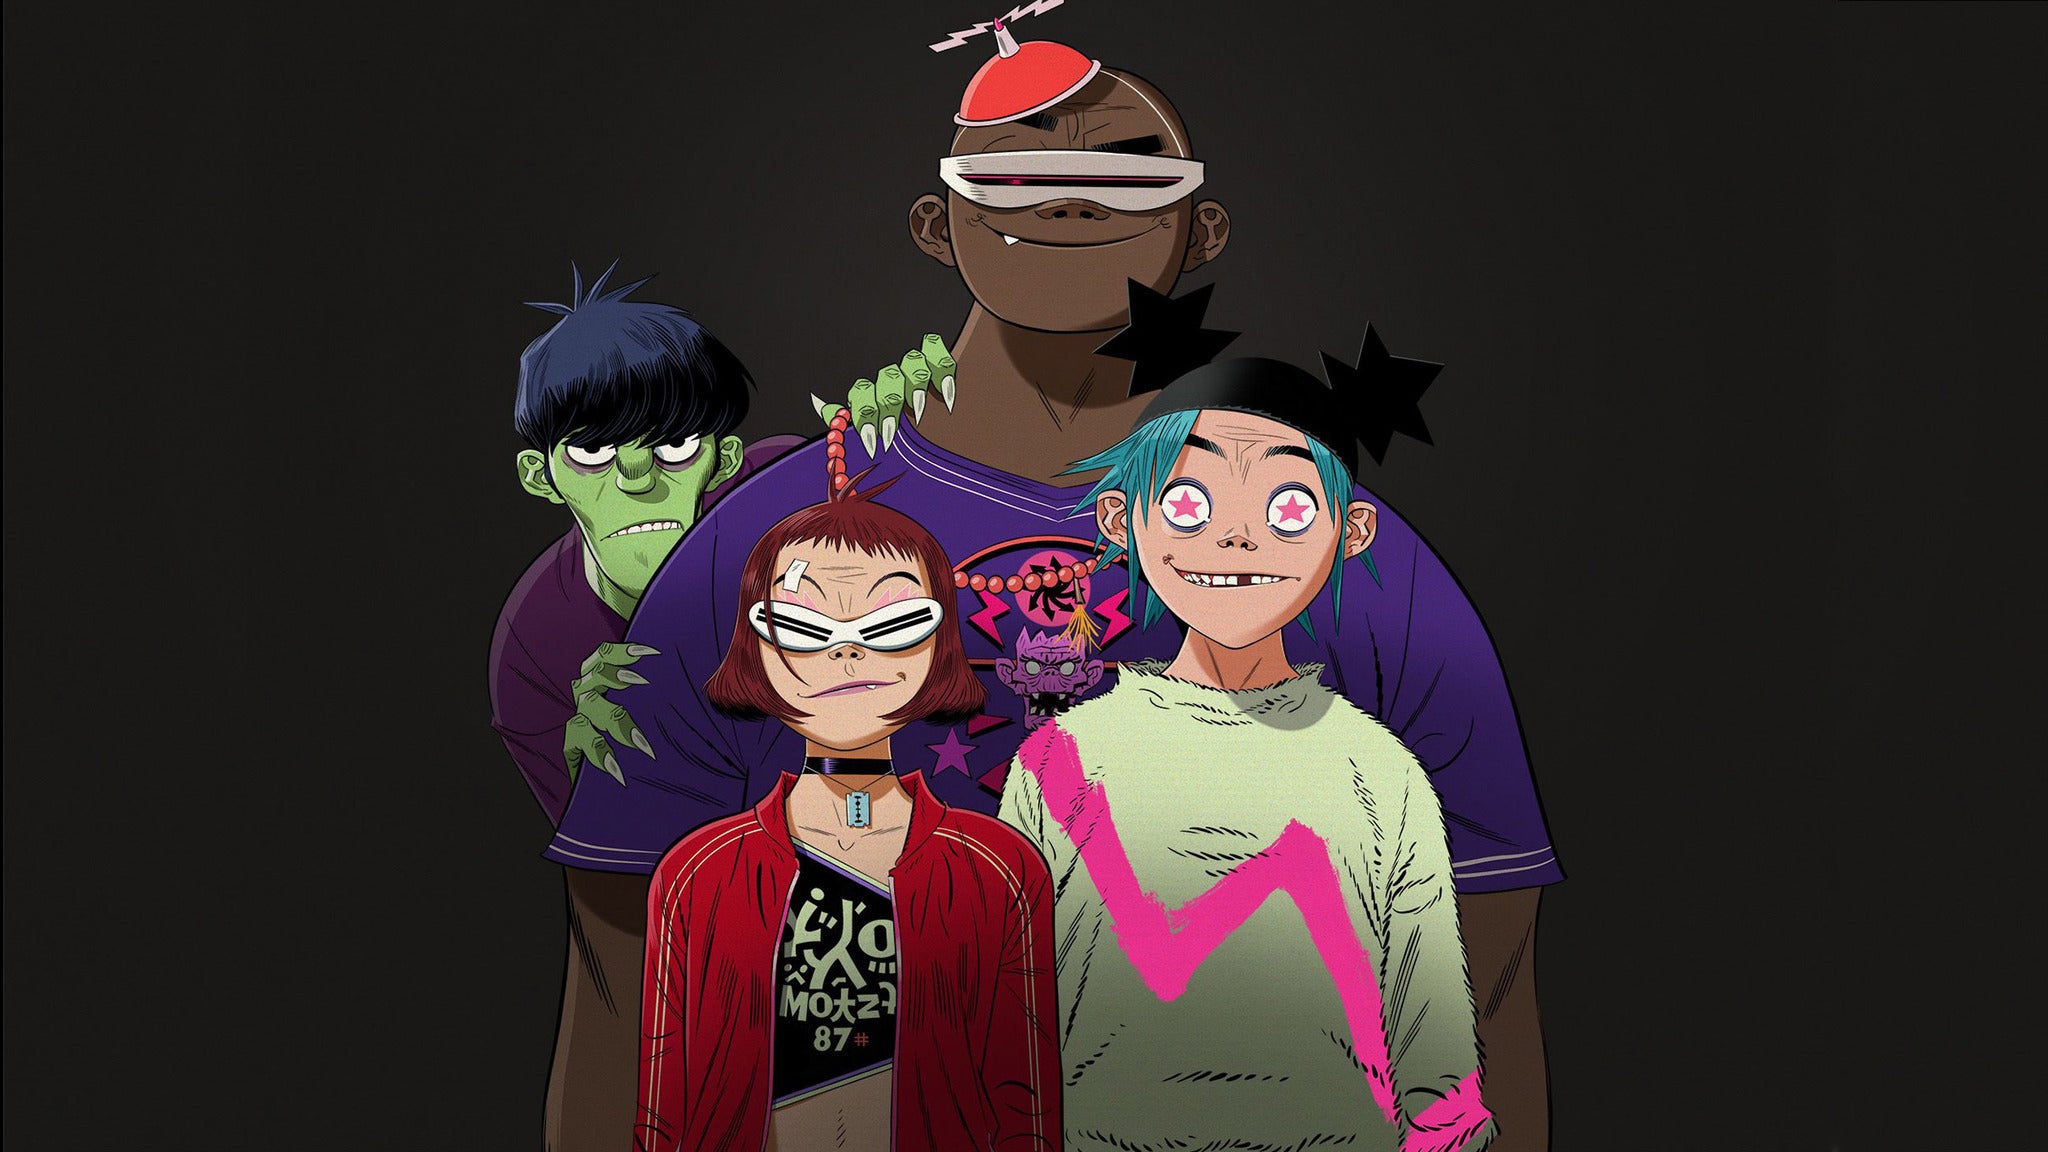 Gorillaz: North America Tour 2022 at Amway Center